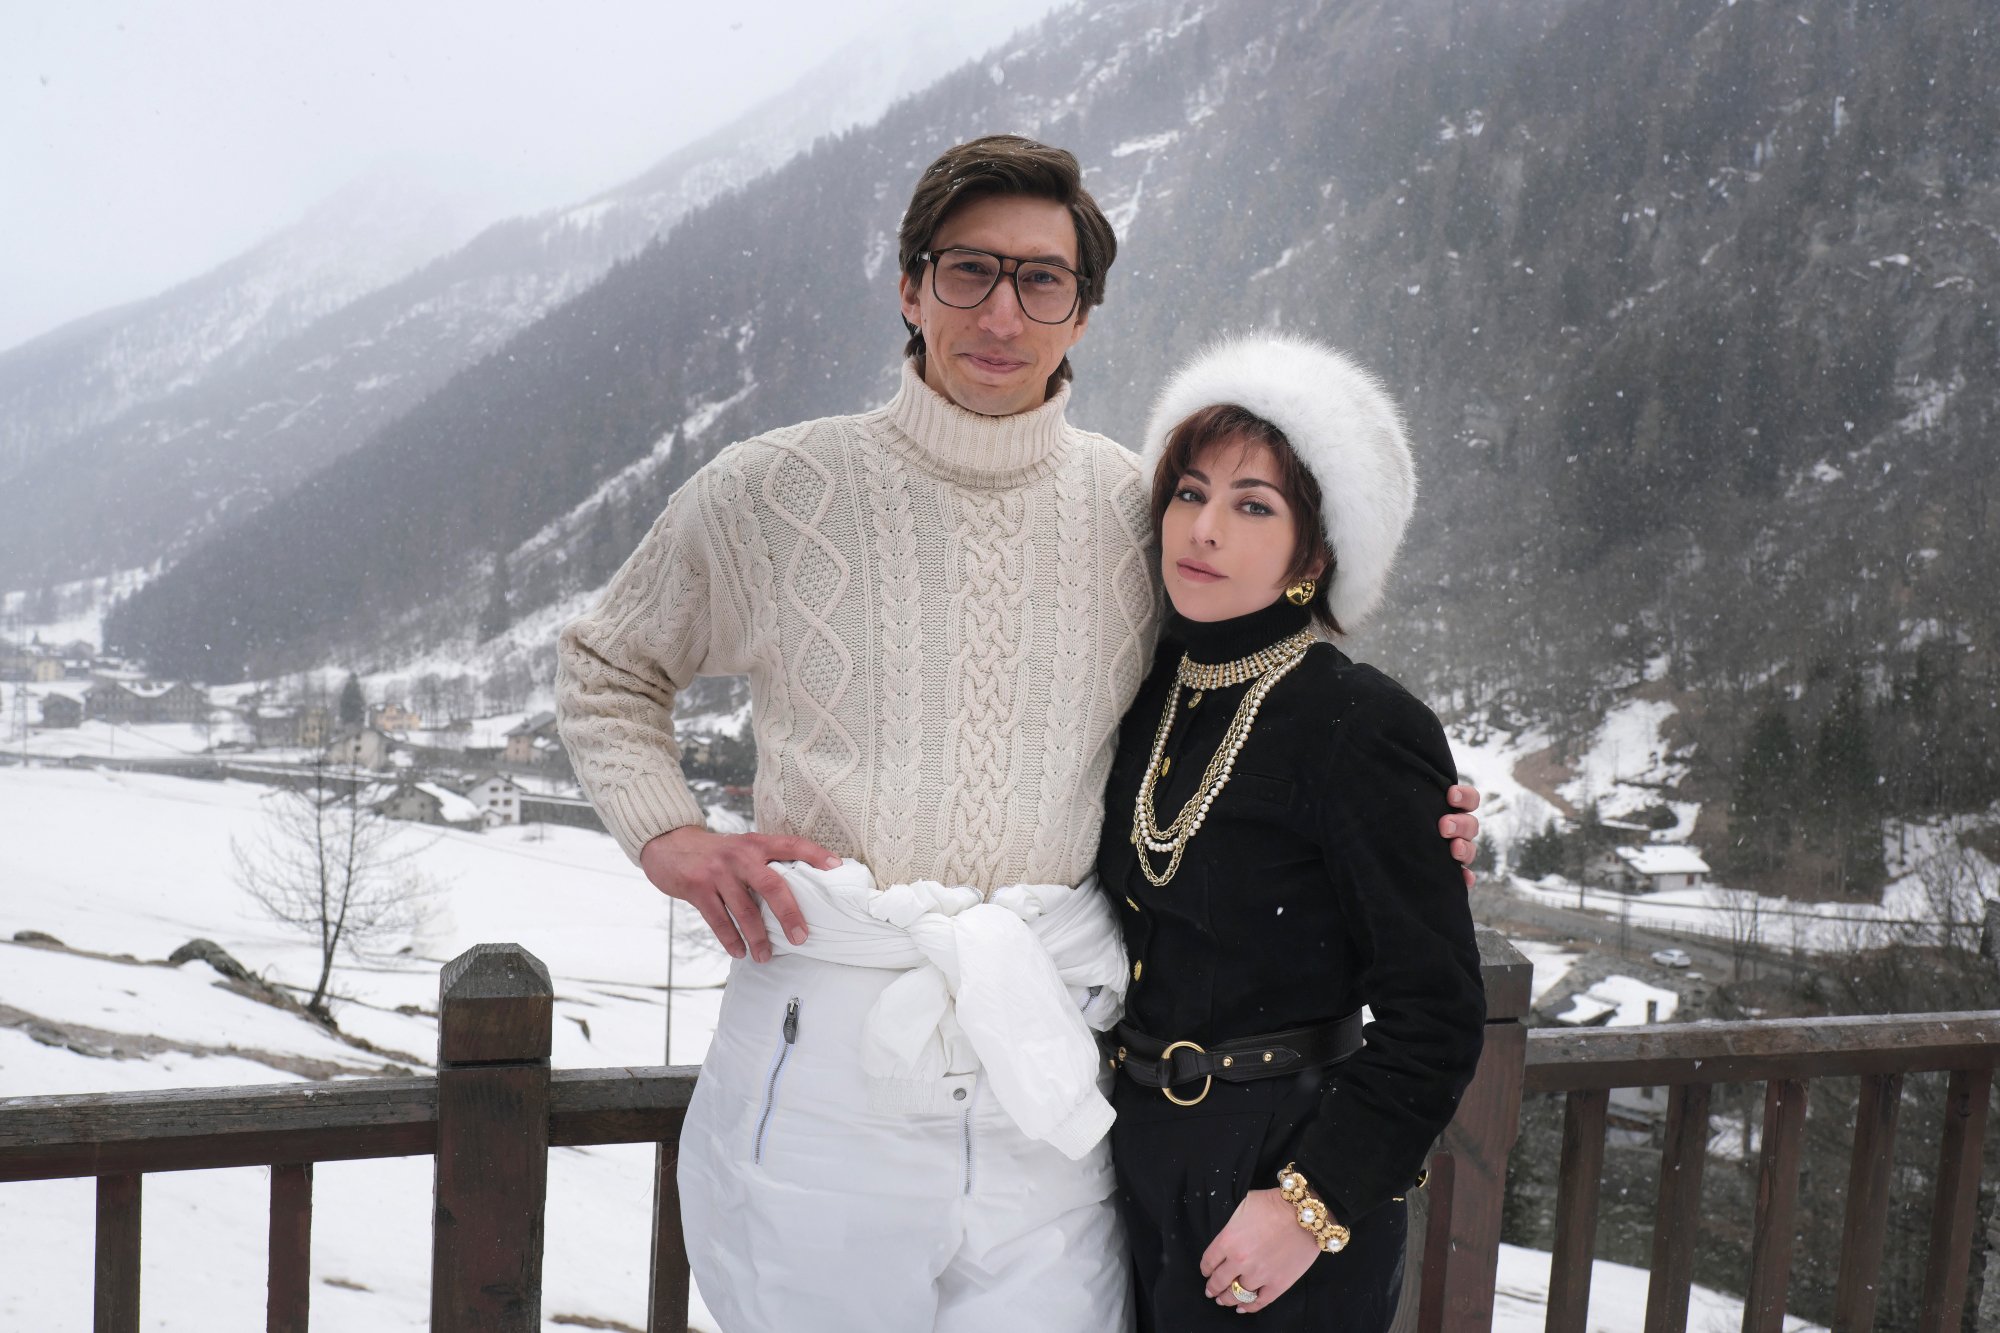 'House of Gucci' review stars Adam Driver as Maurizio Gucci and Lady Gaga stars as Patrizia Reggiani in snow clothes with a snow-covered landscape behind them